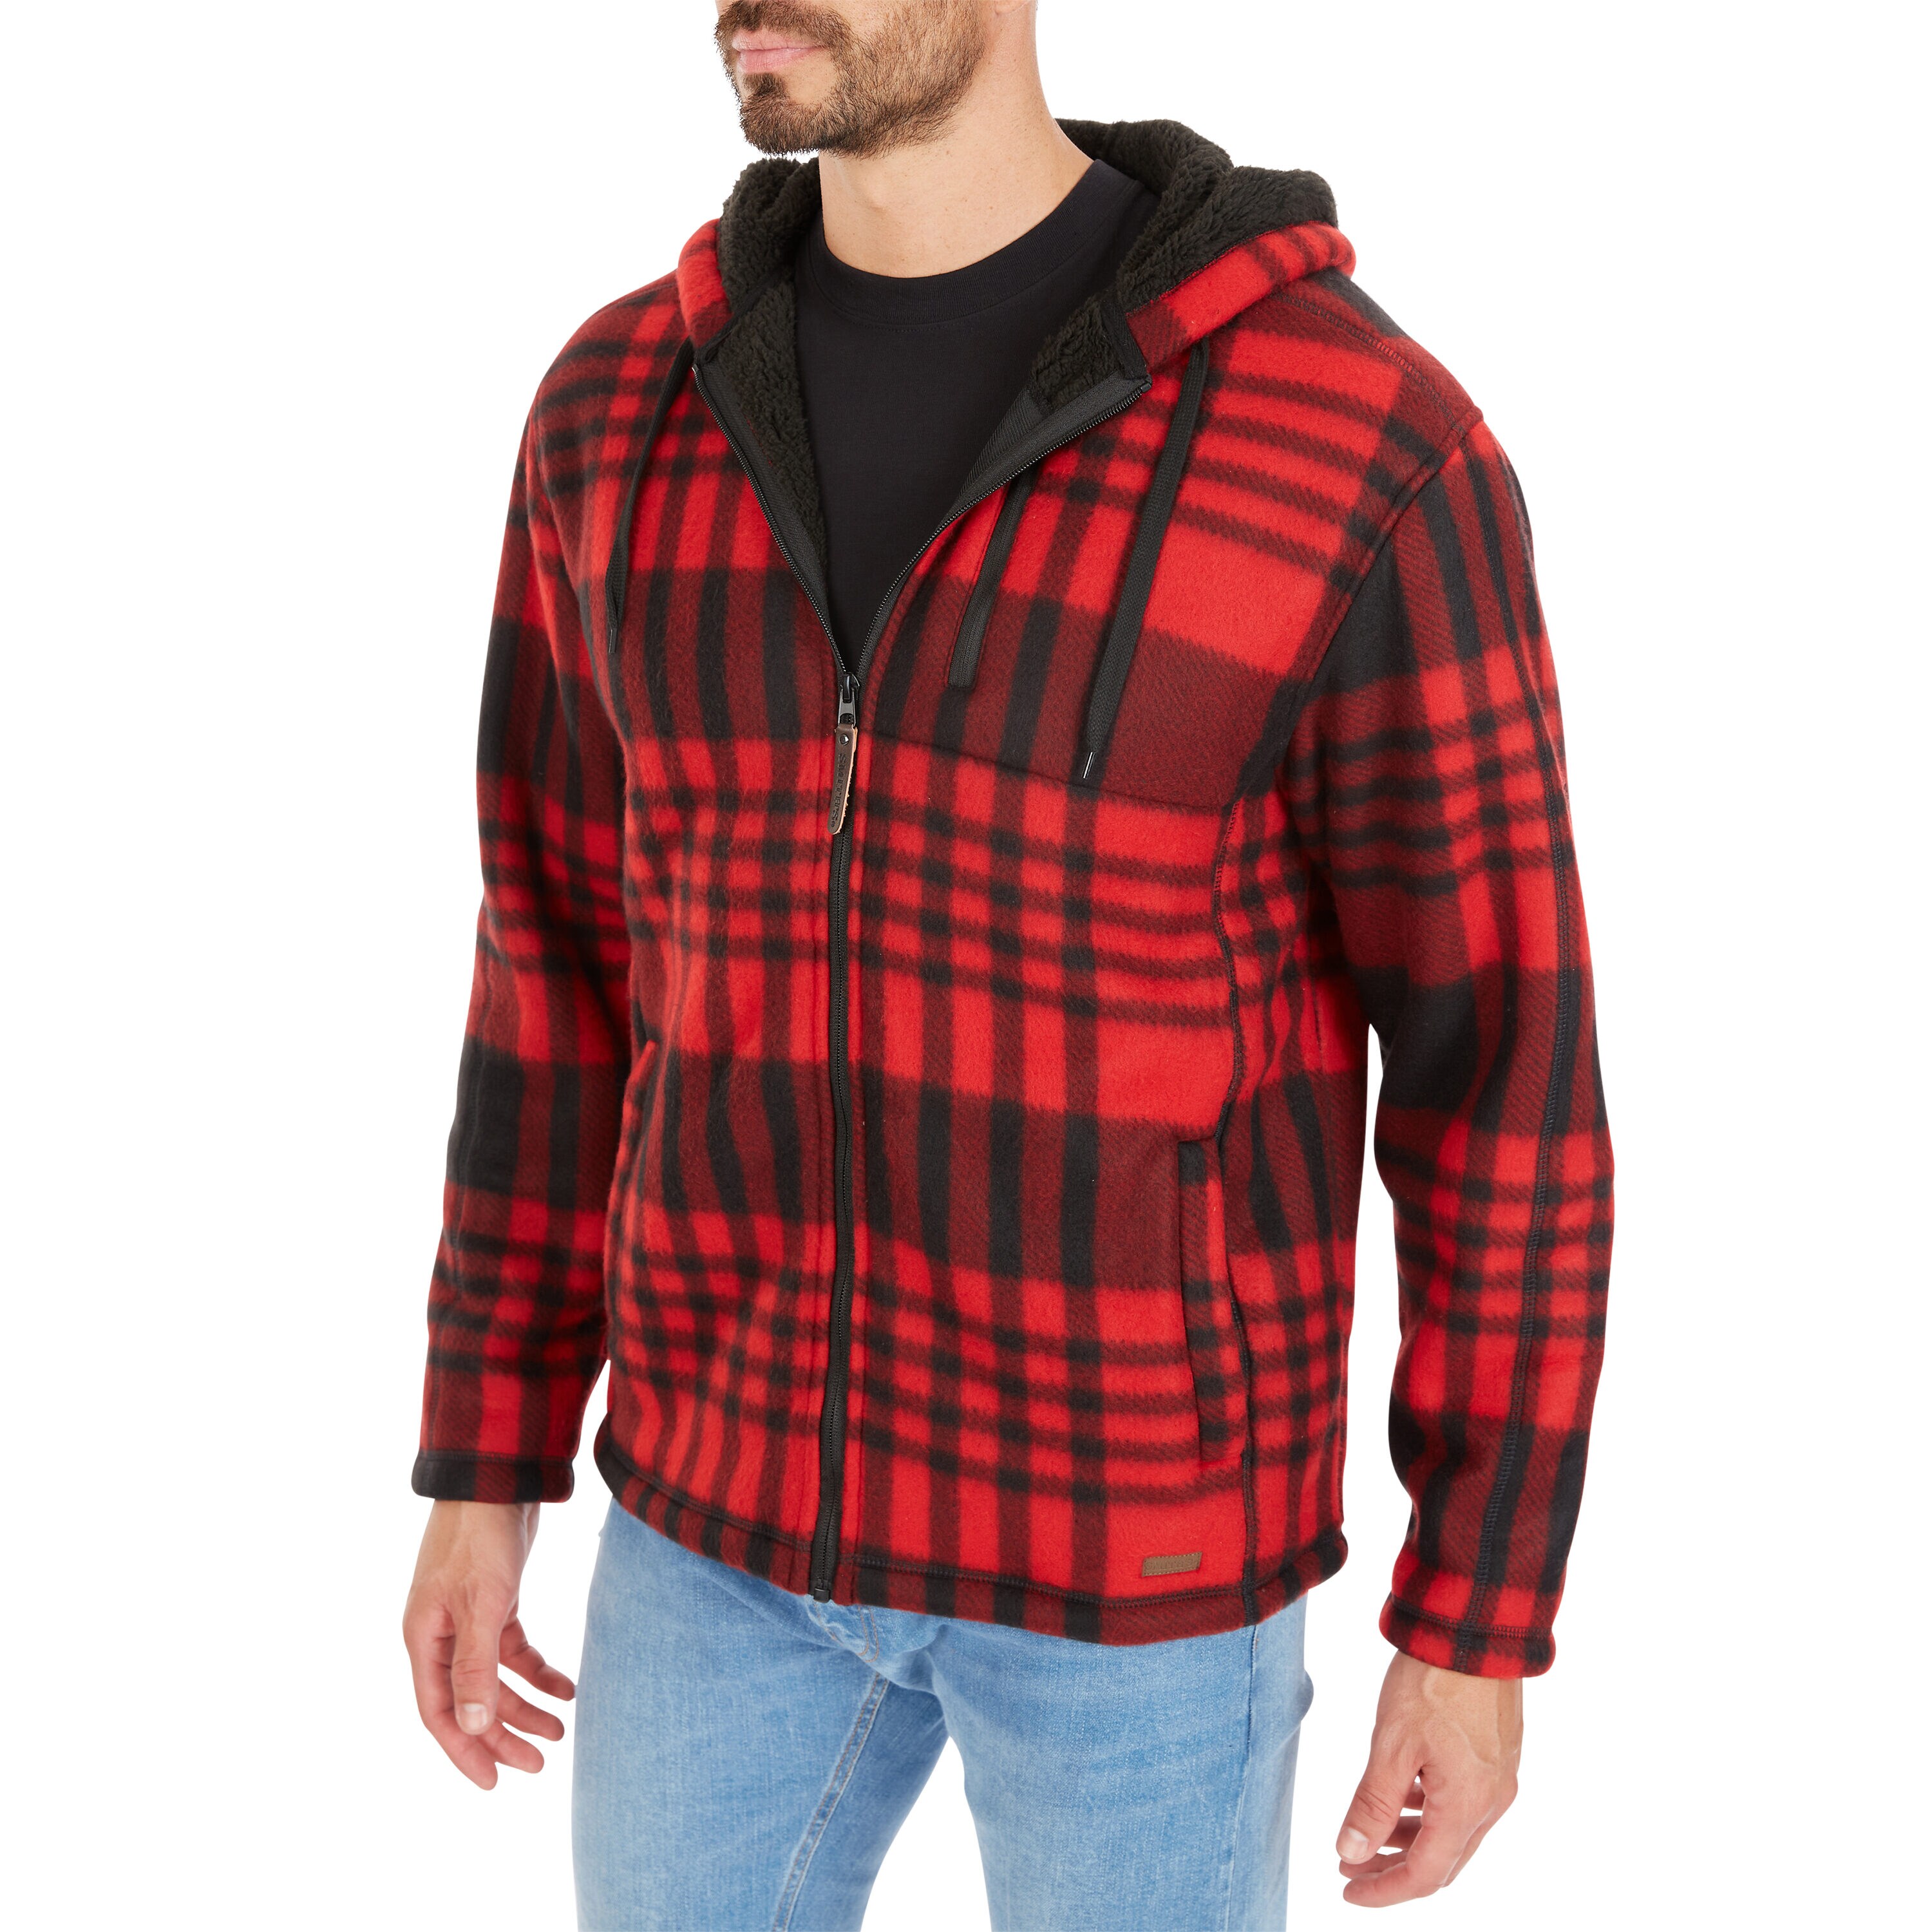 Smith\'s Workwear Lined Full Coats Polar Fleece Plaid department Butter-Sherpa in Jacket Jackets the at Hooded Work Zip 